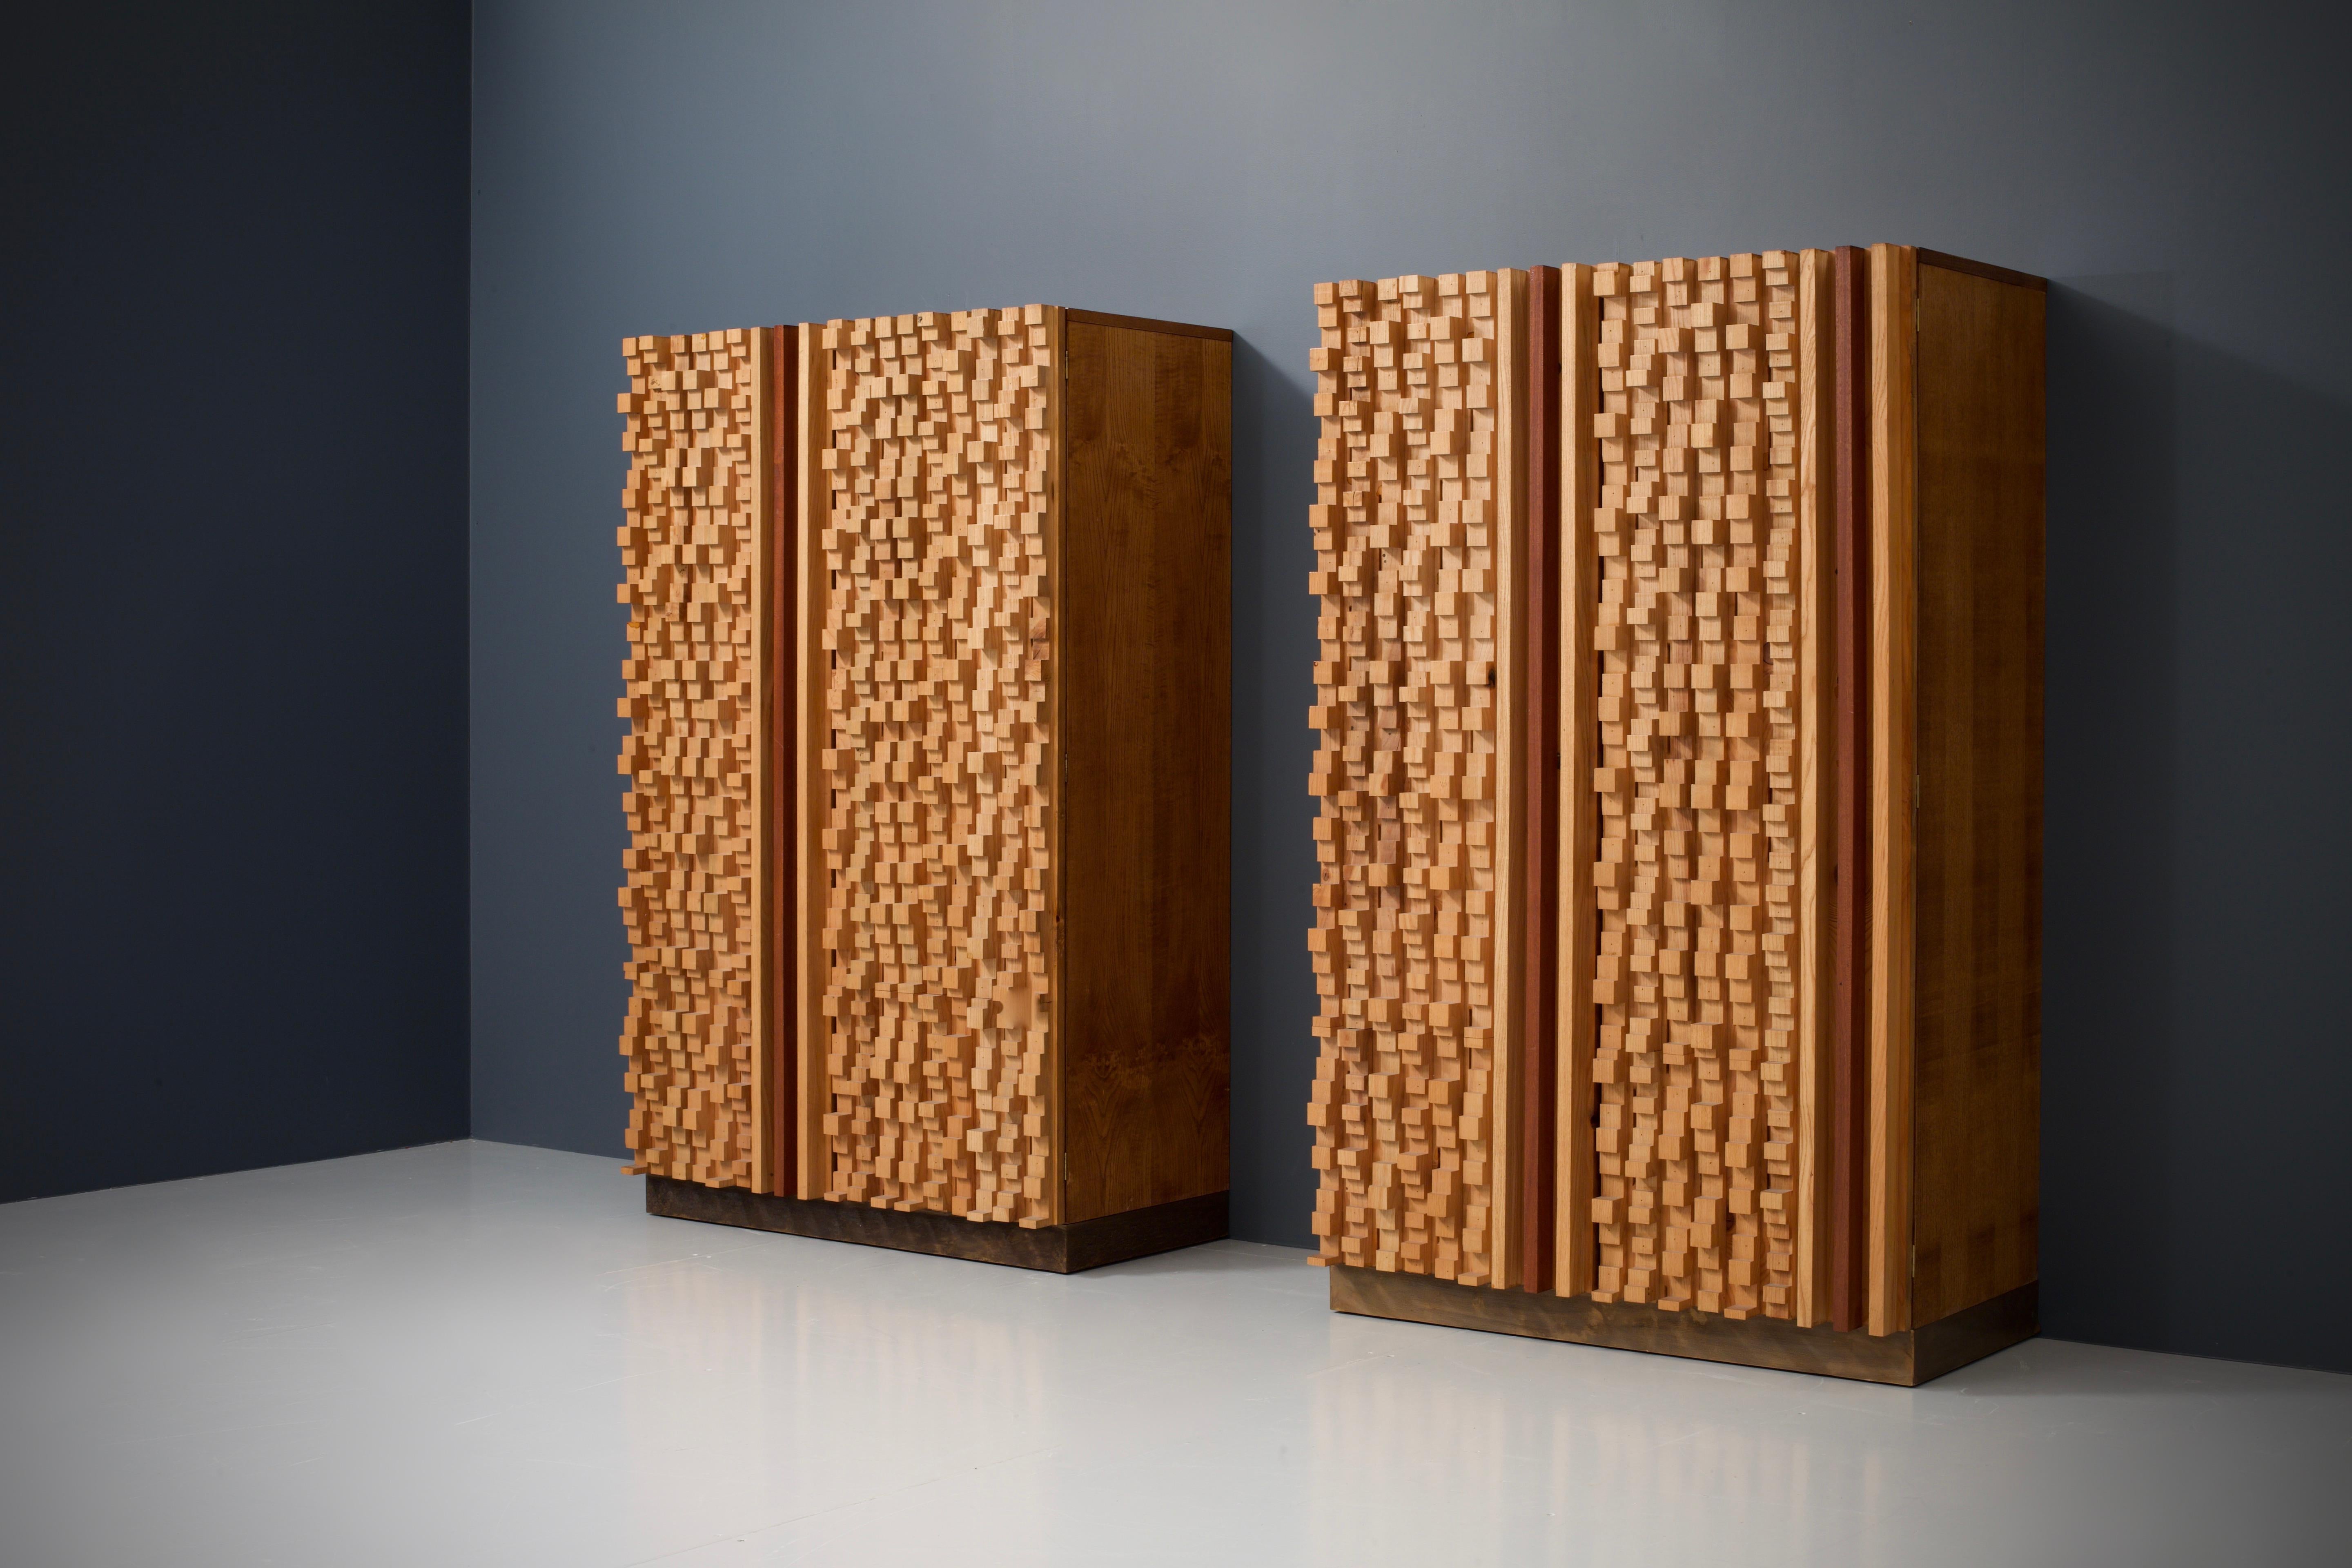 Set of 3 Wall Panels and 2 Cabinets by Stefano d'Amico, Italy, 1975 For Sale 8